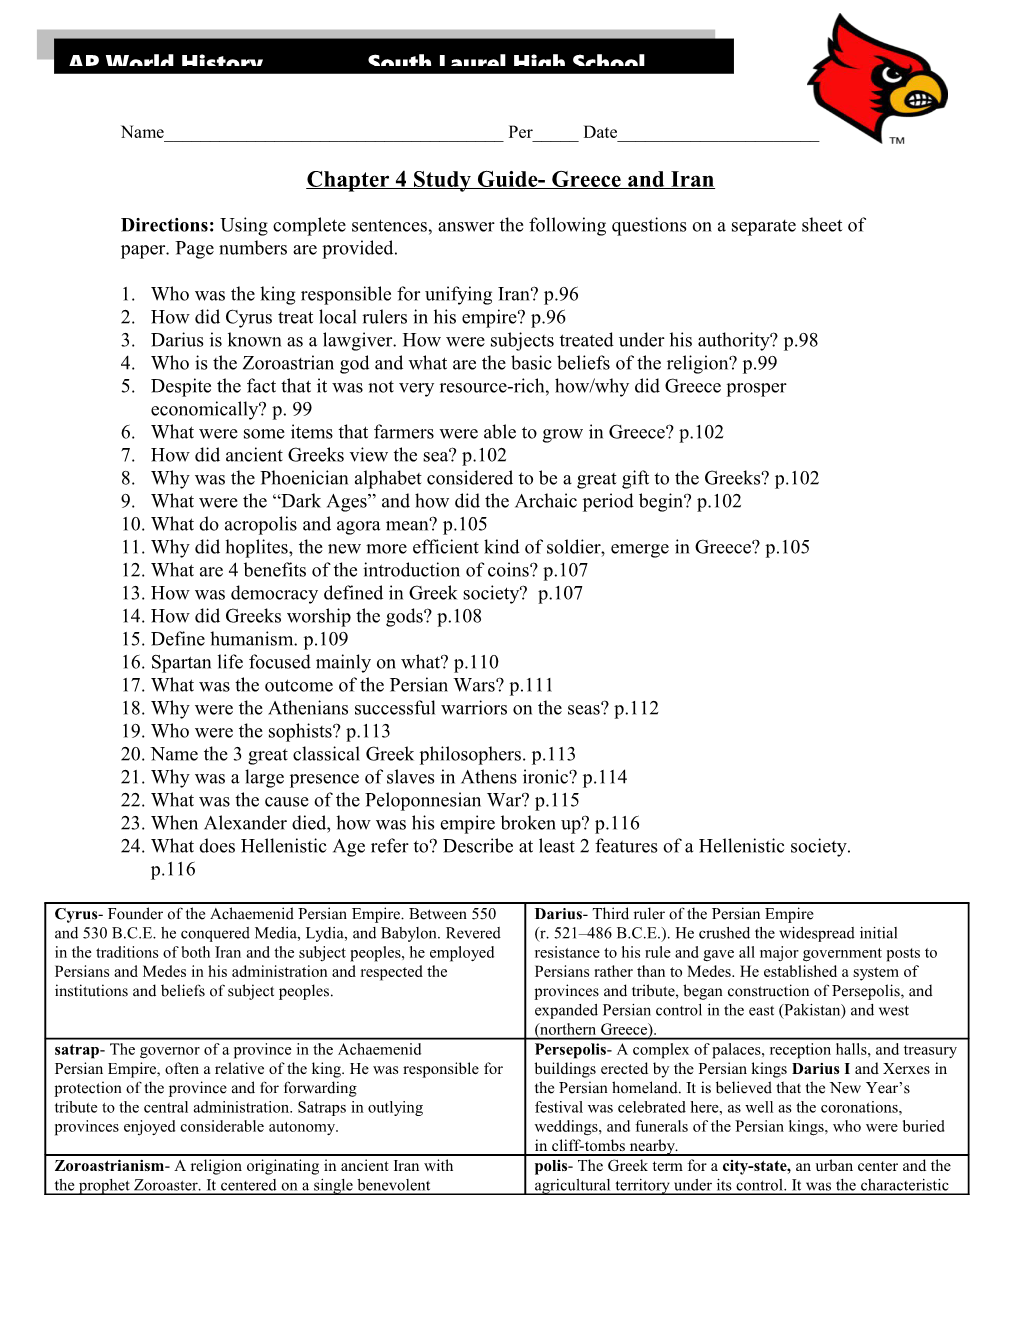 Chapter 4 Study Guide- Greece and Iran